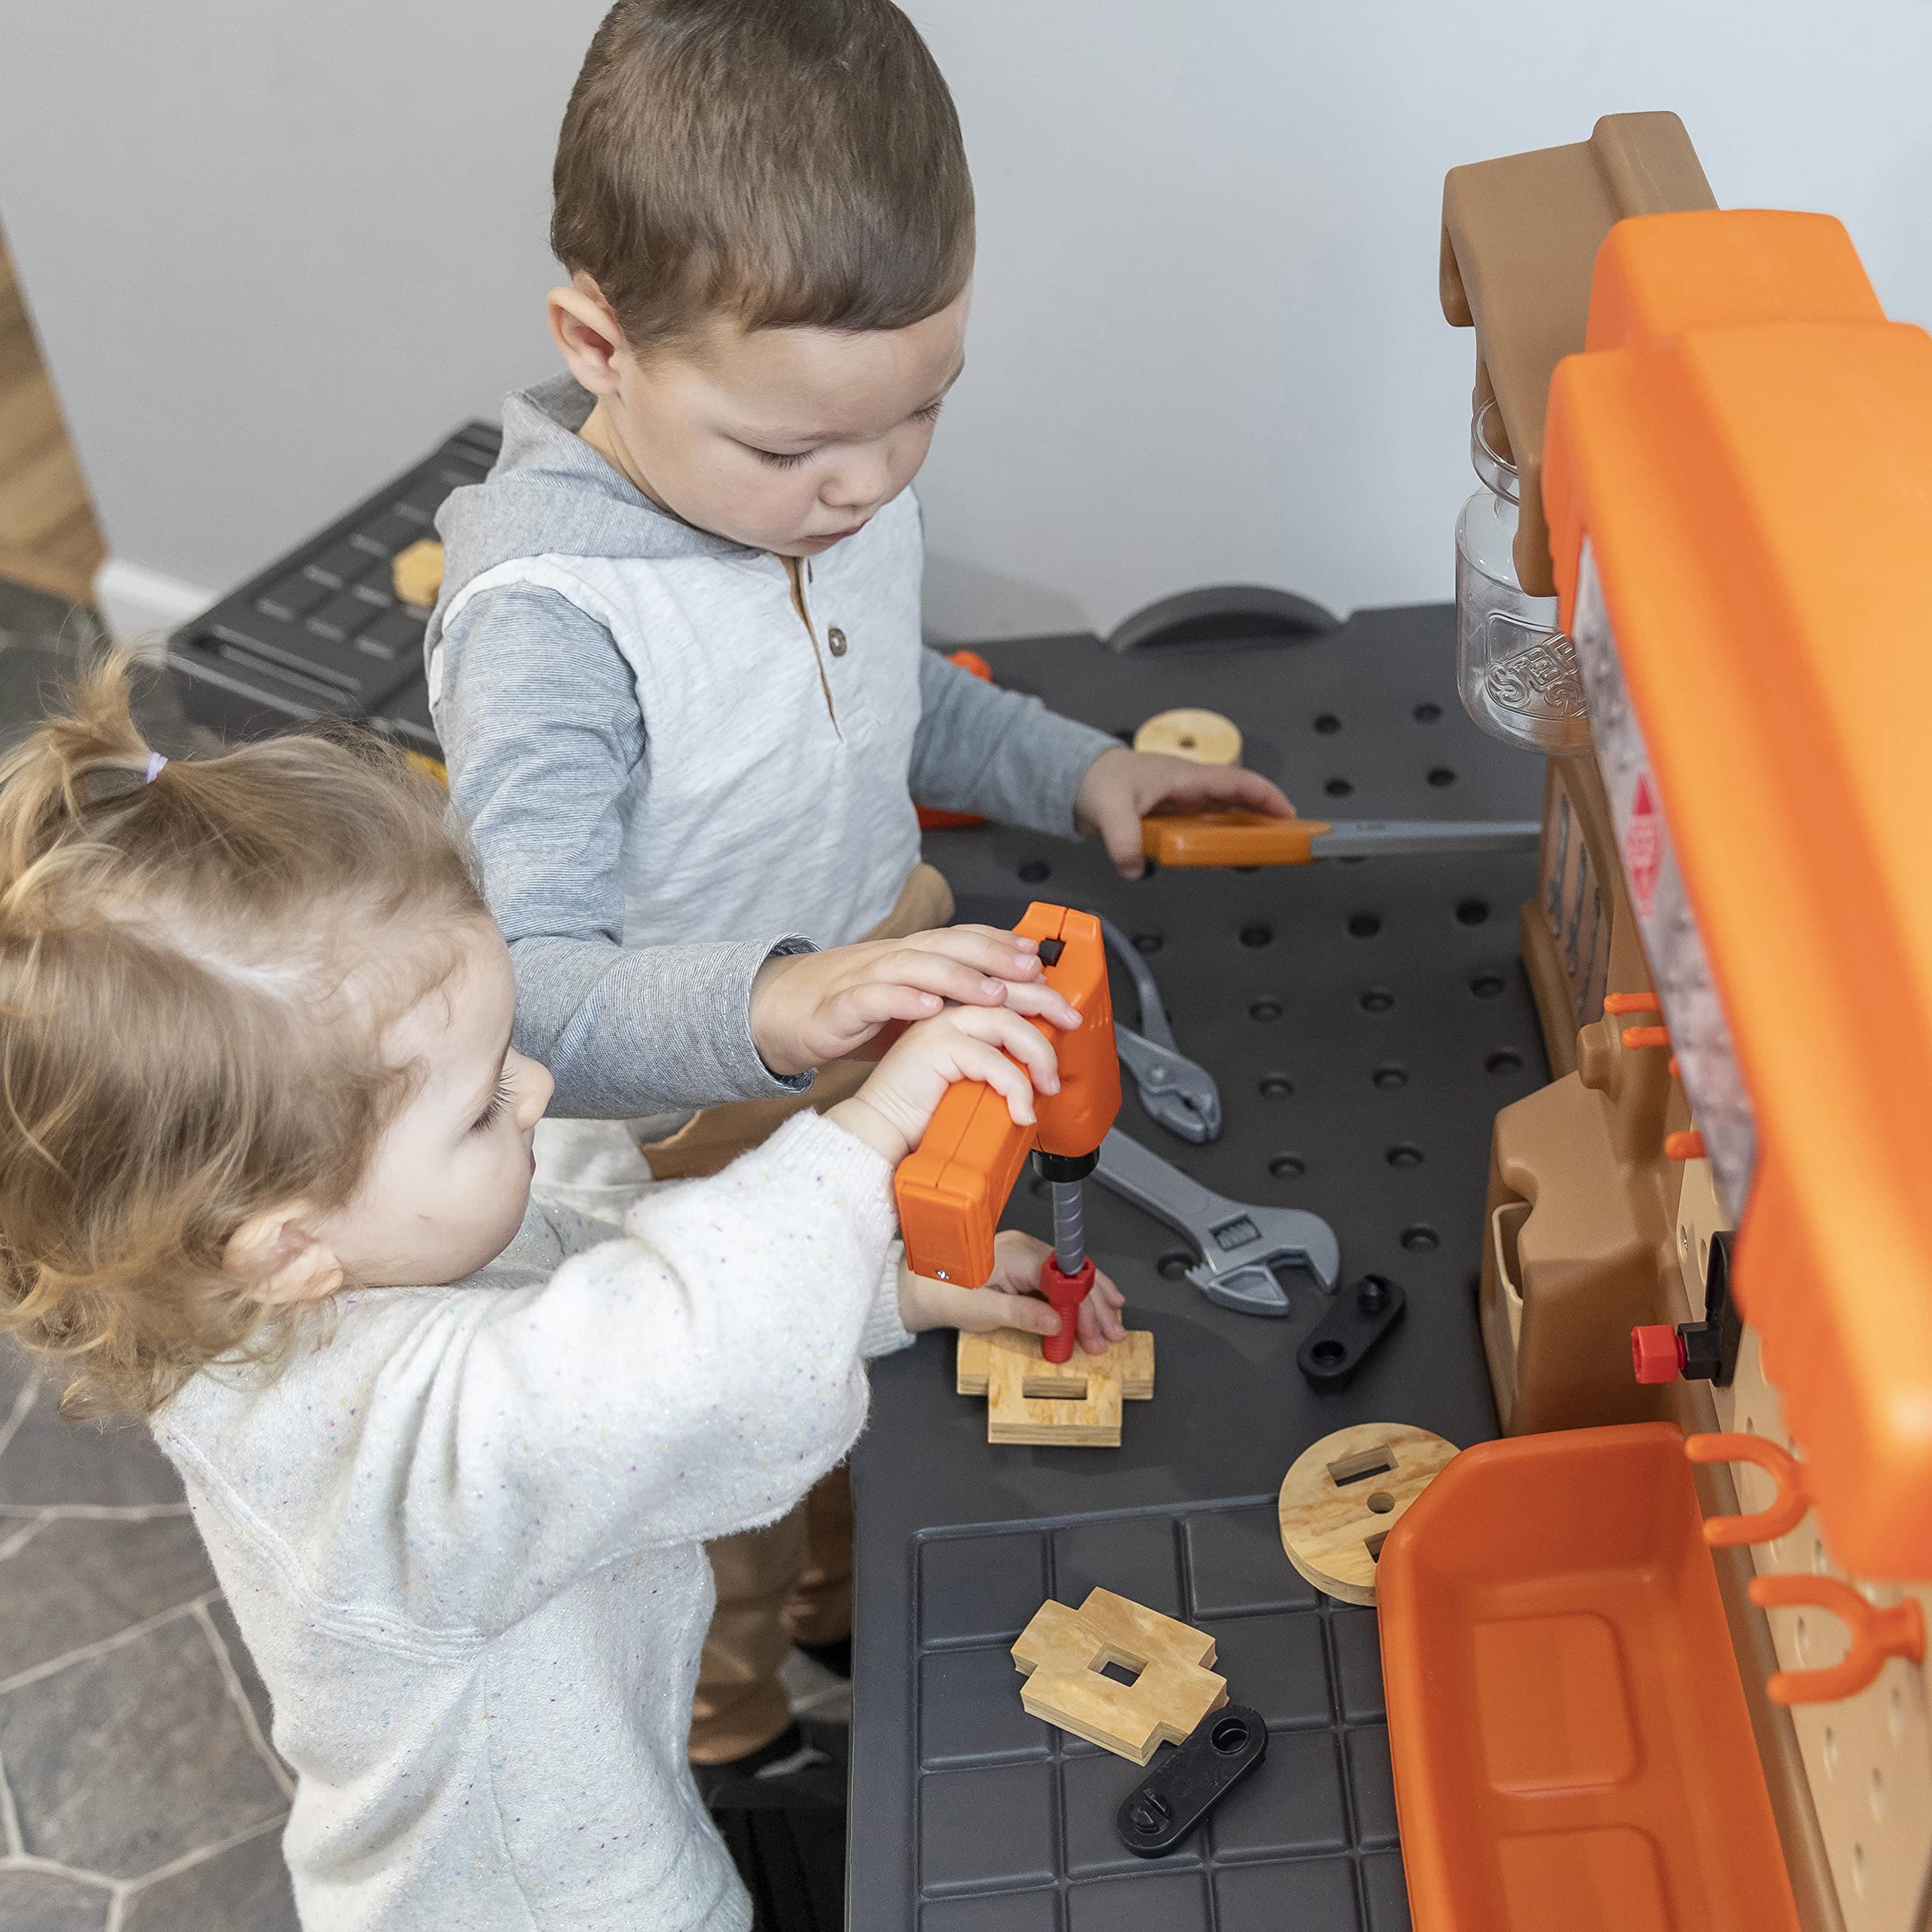 Step2 Pro Play Kids Workshop with Utility Bench – Includes 70+ Toy Workbench Accessories, Interactive Features for Pretend Play – Indoor/Outdoor Tool Bench – Dimensions 39.63